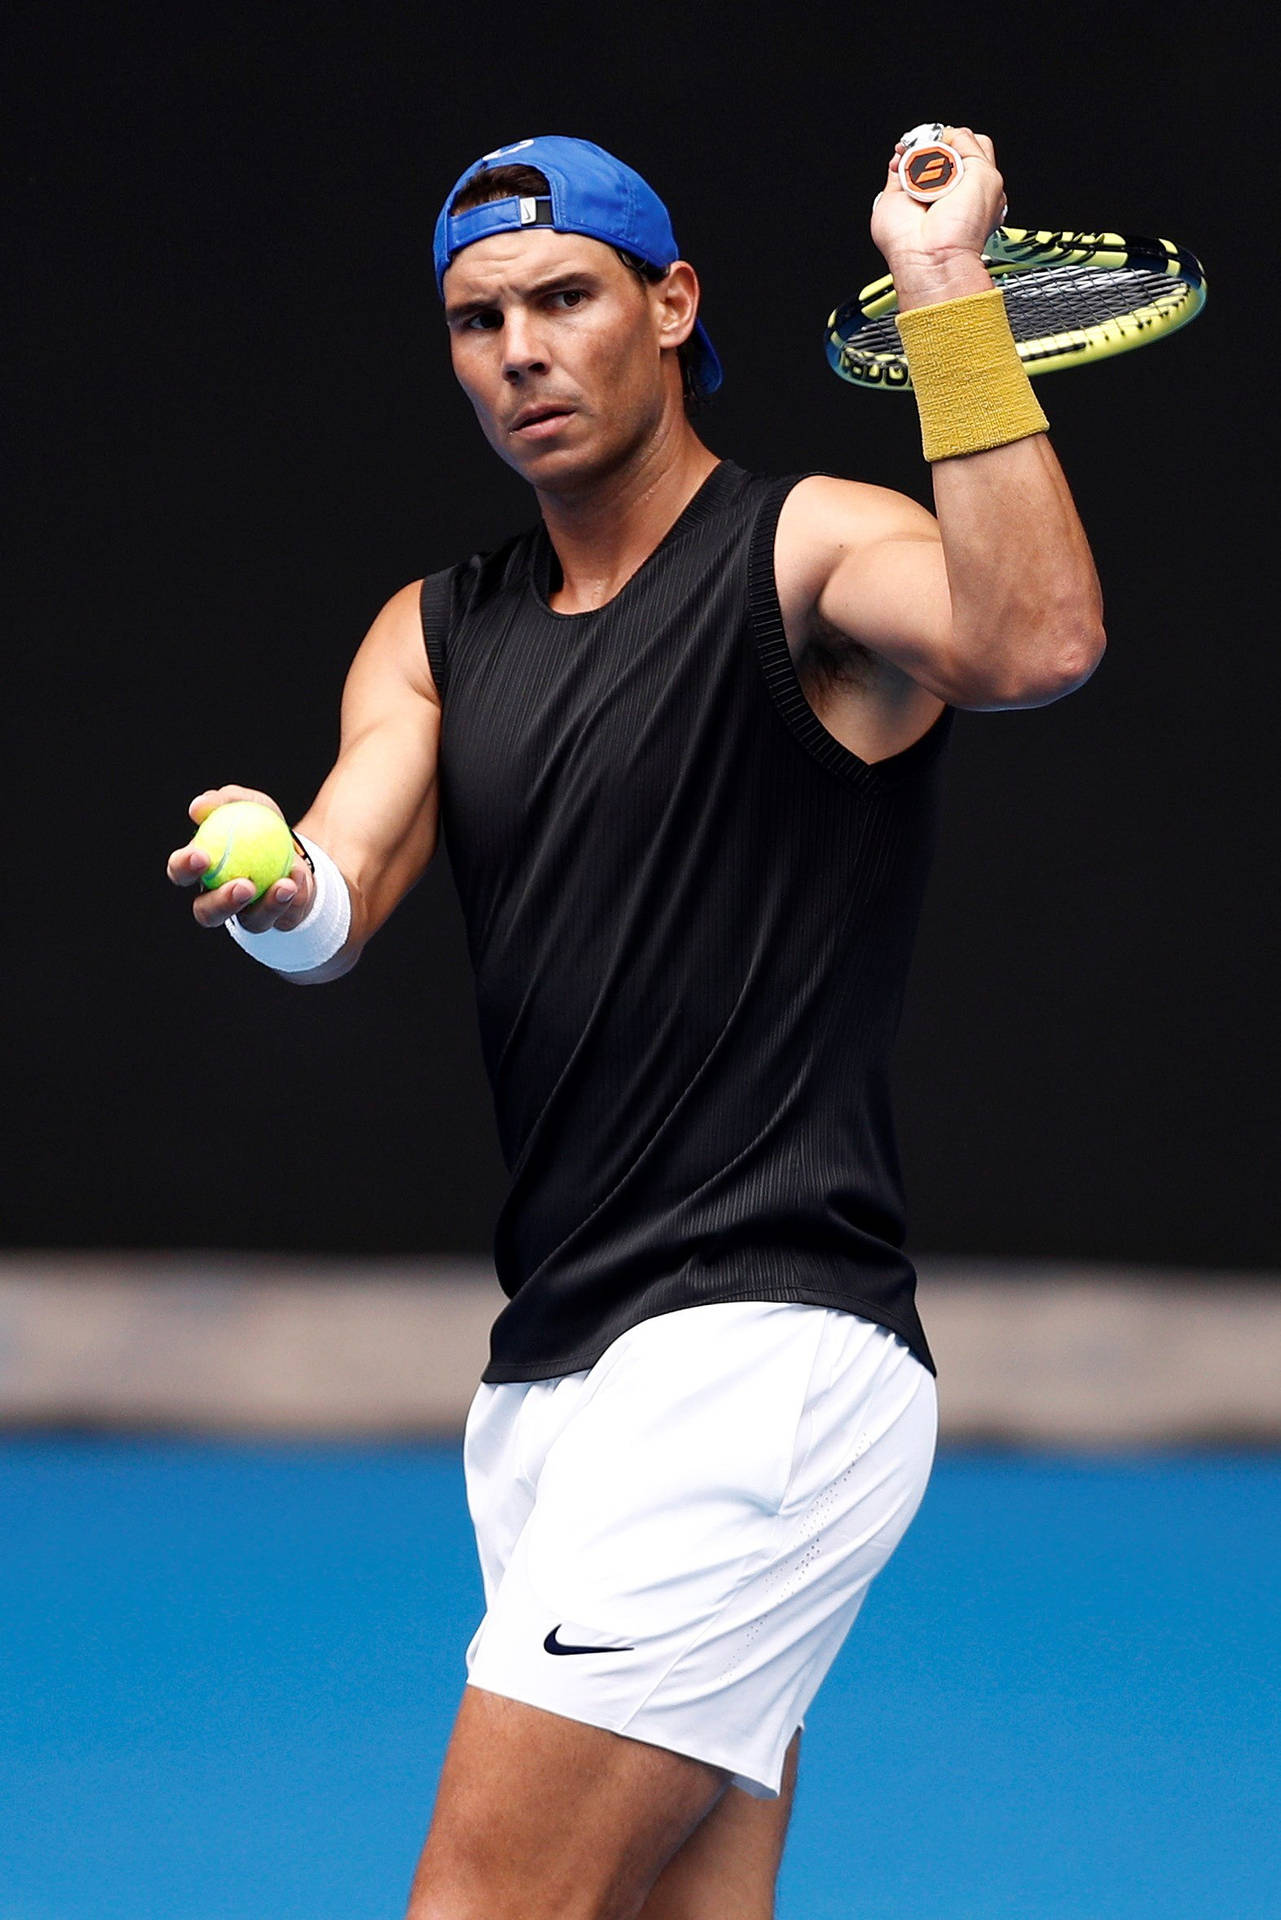 Rafael Nadal With Racket Up